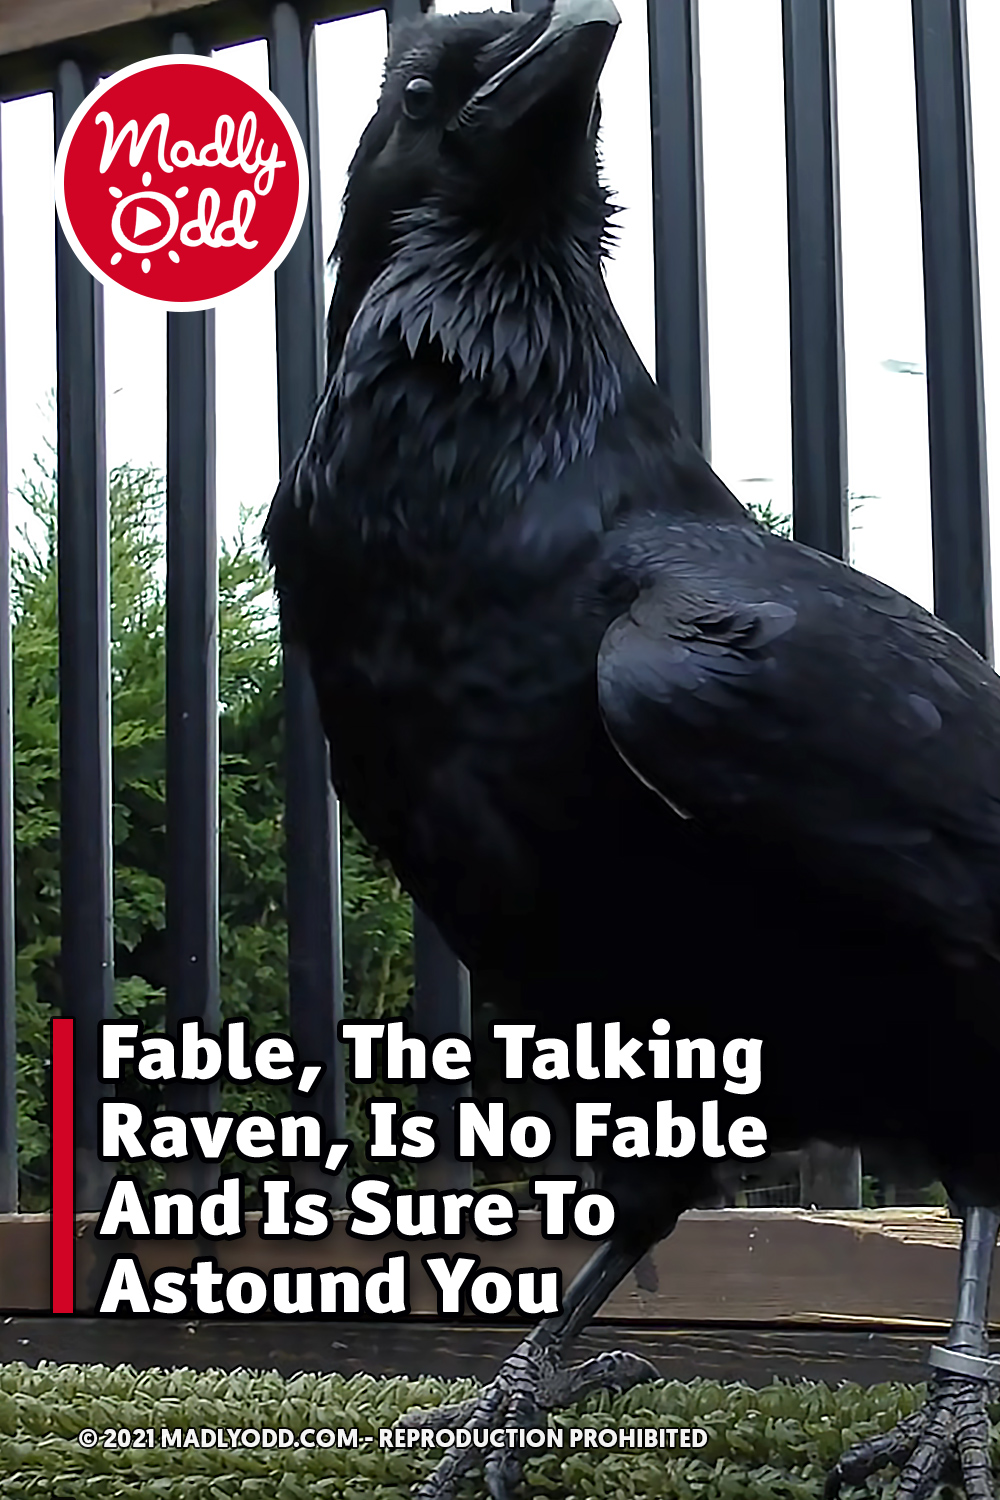 Fable, The Talking Raven, Is No Fable And Is Sure To Astound You